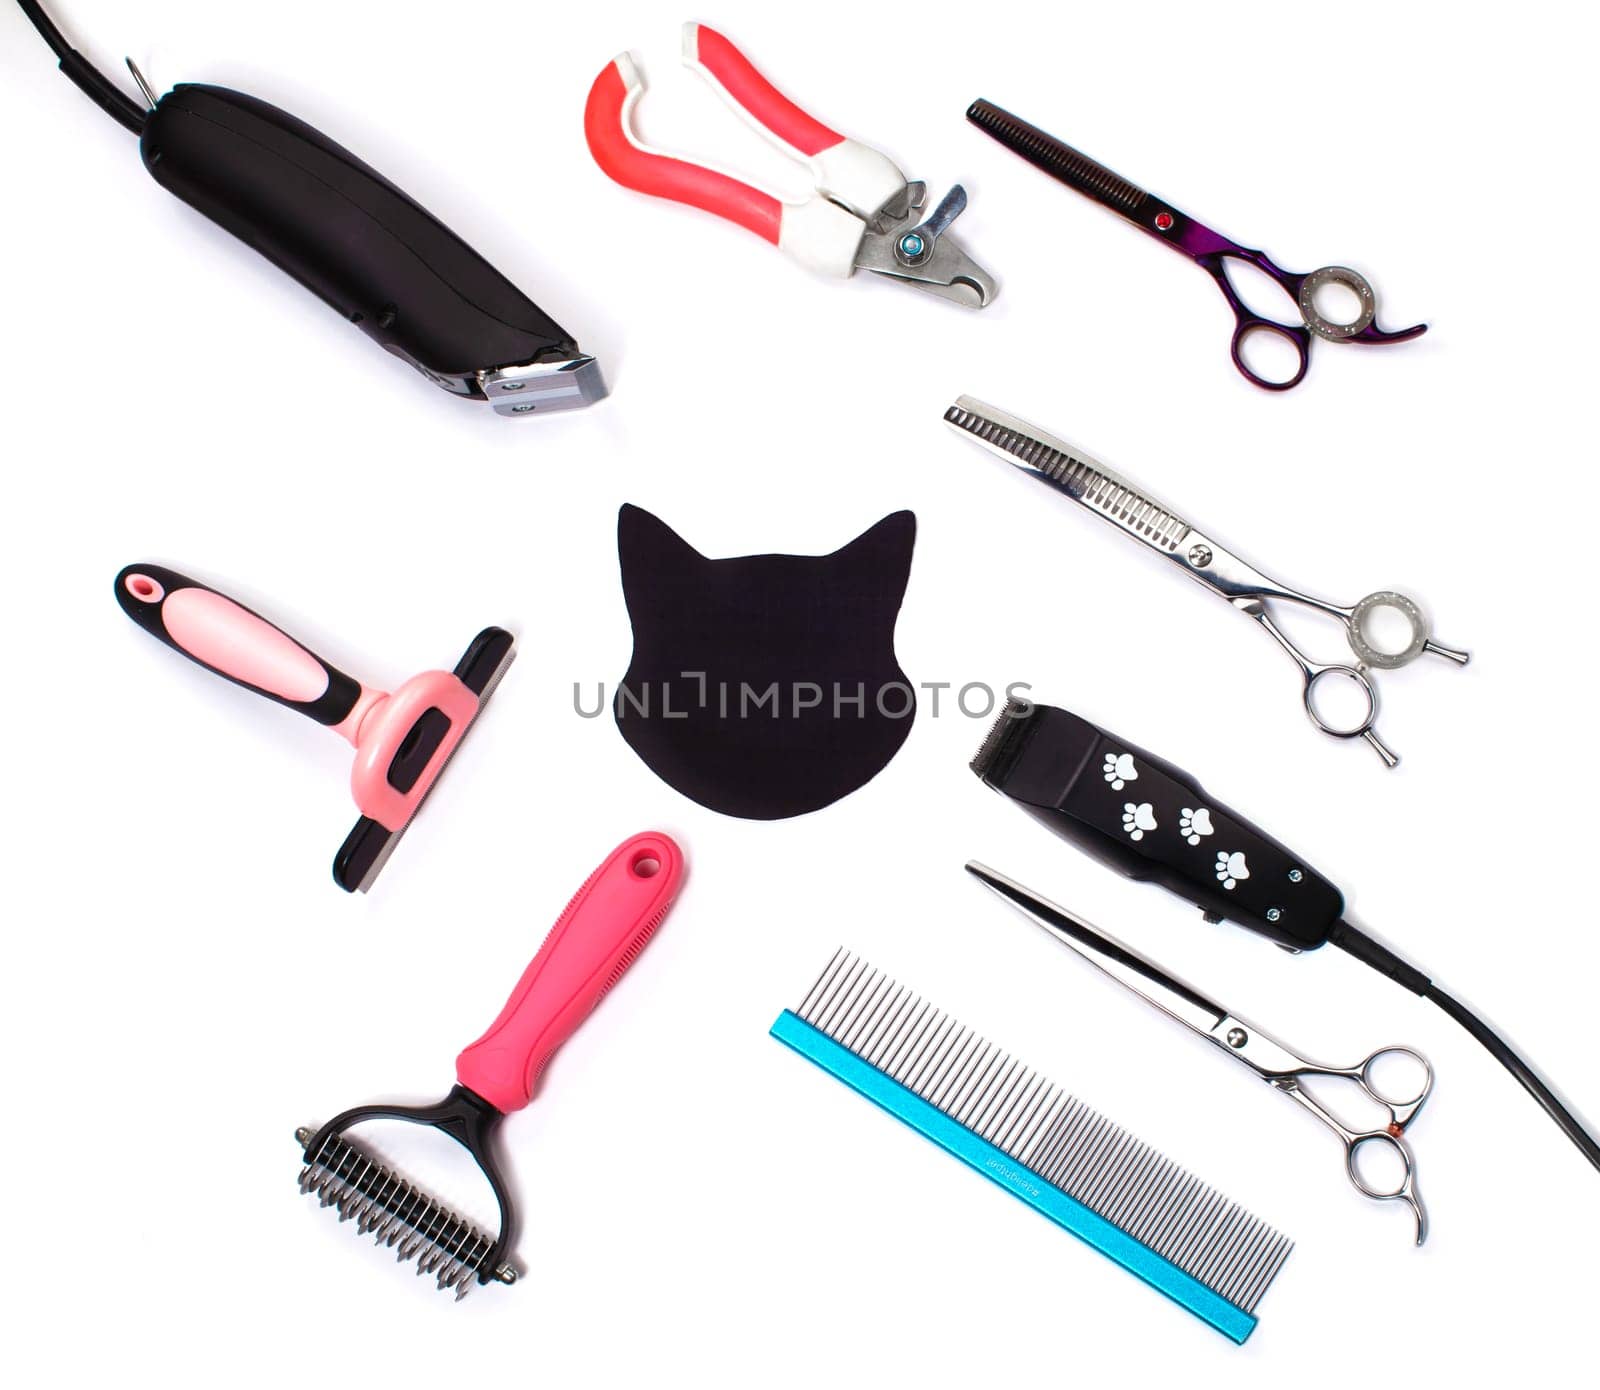 Tool for the groomer on a white background. Accessories for dog and cat care. Scissors for cutting animals. View from above.A fabric-cut cat's face surrounded by a grooming tool.